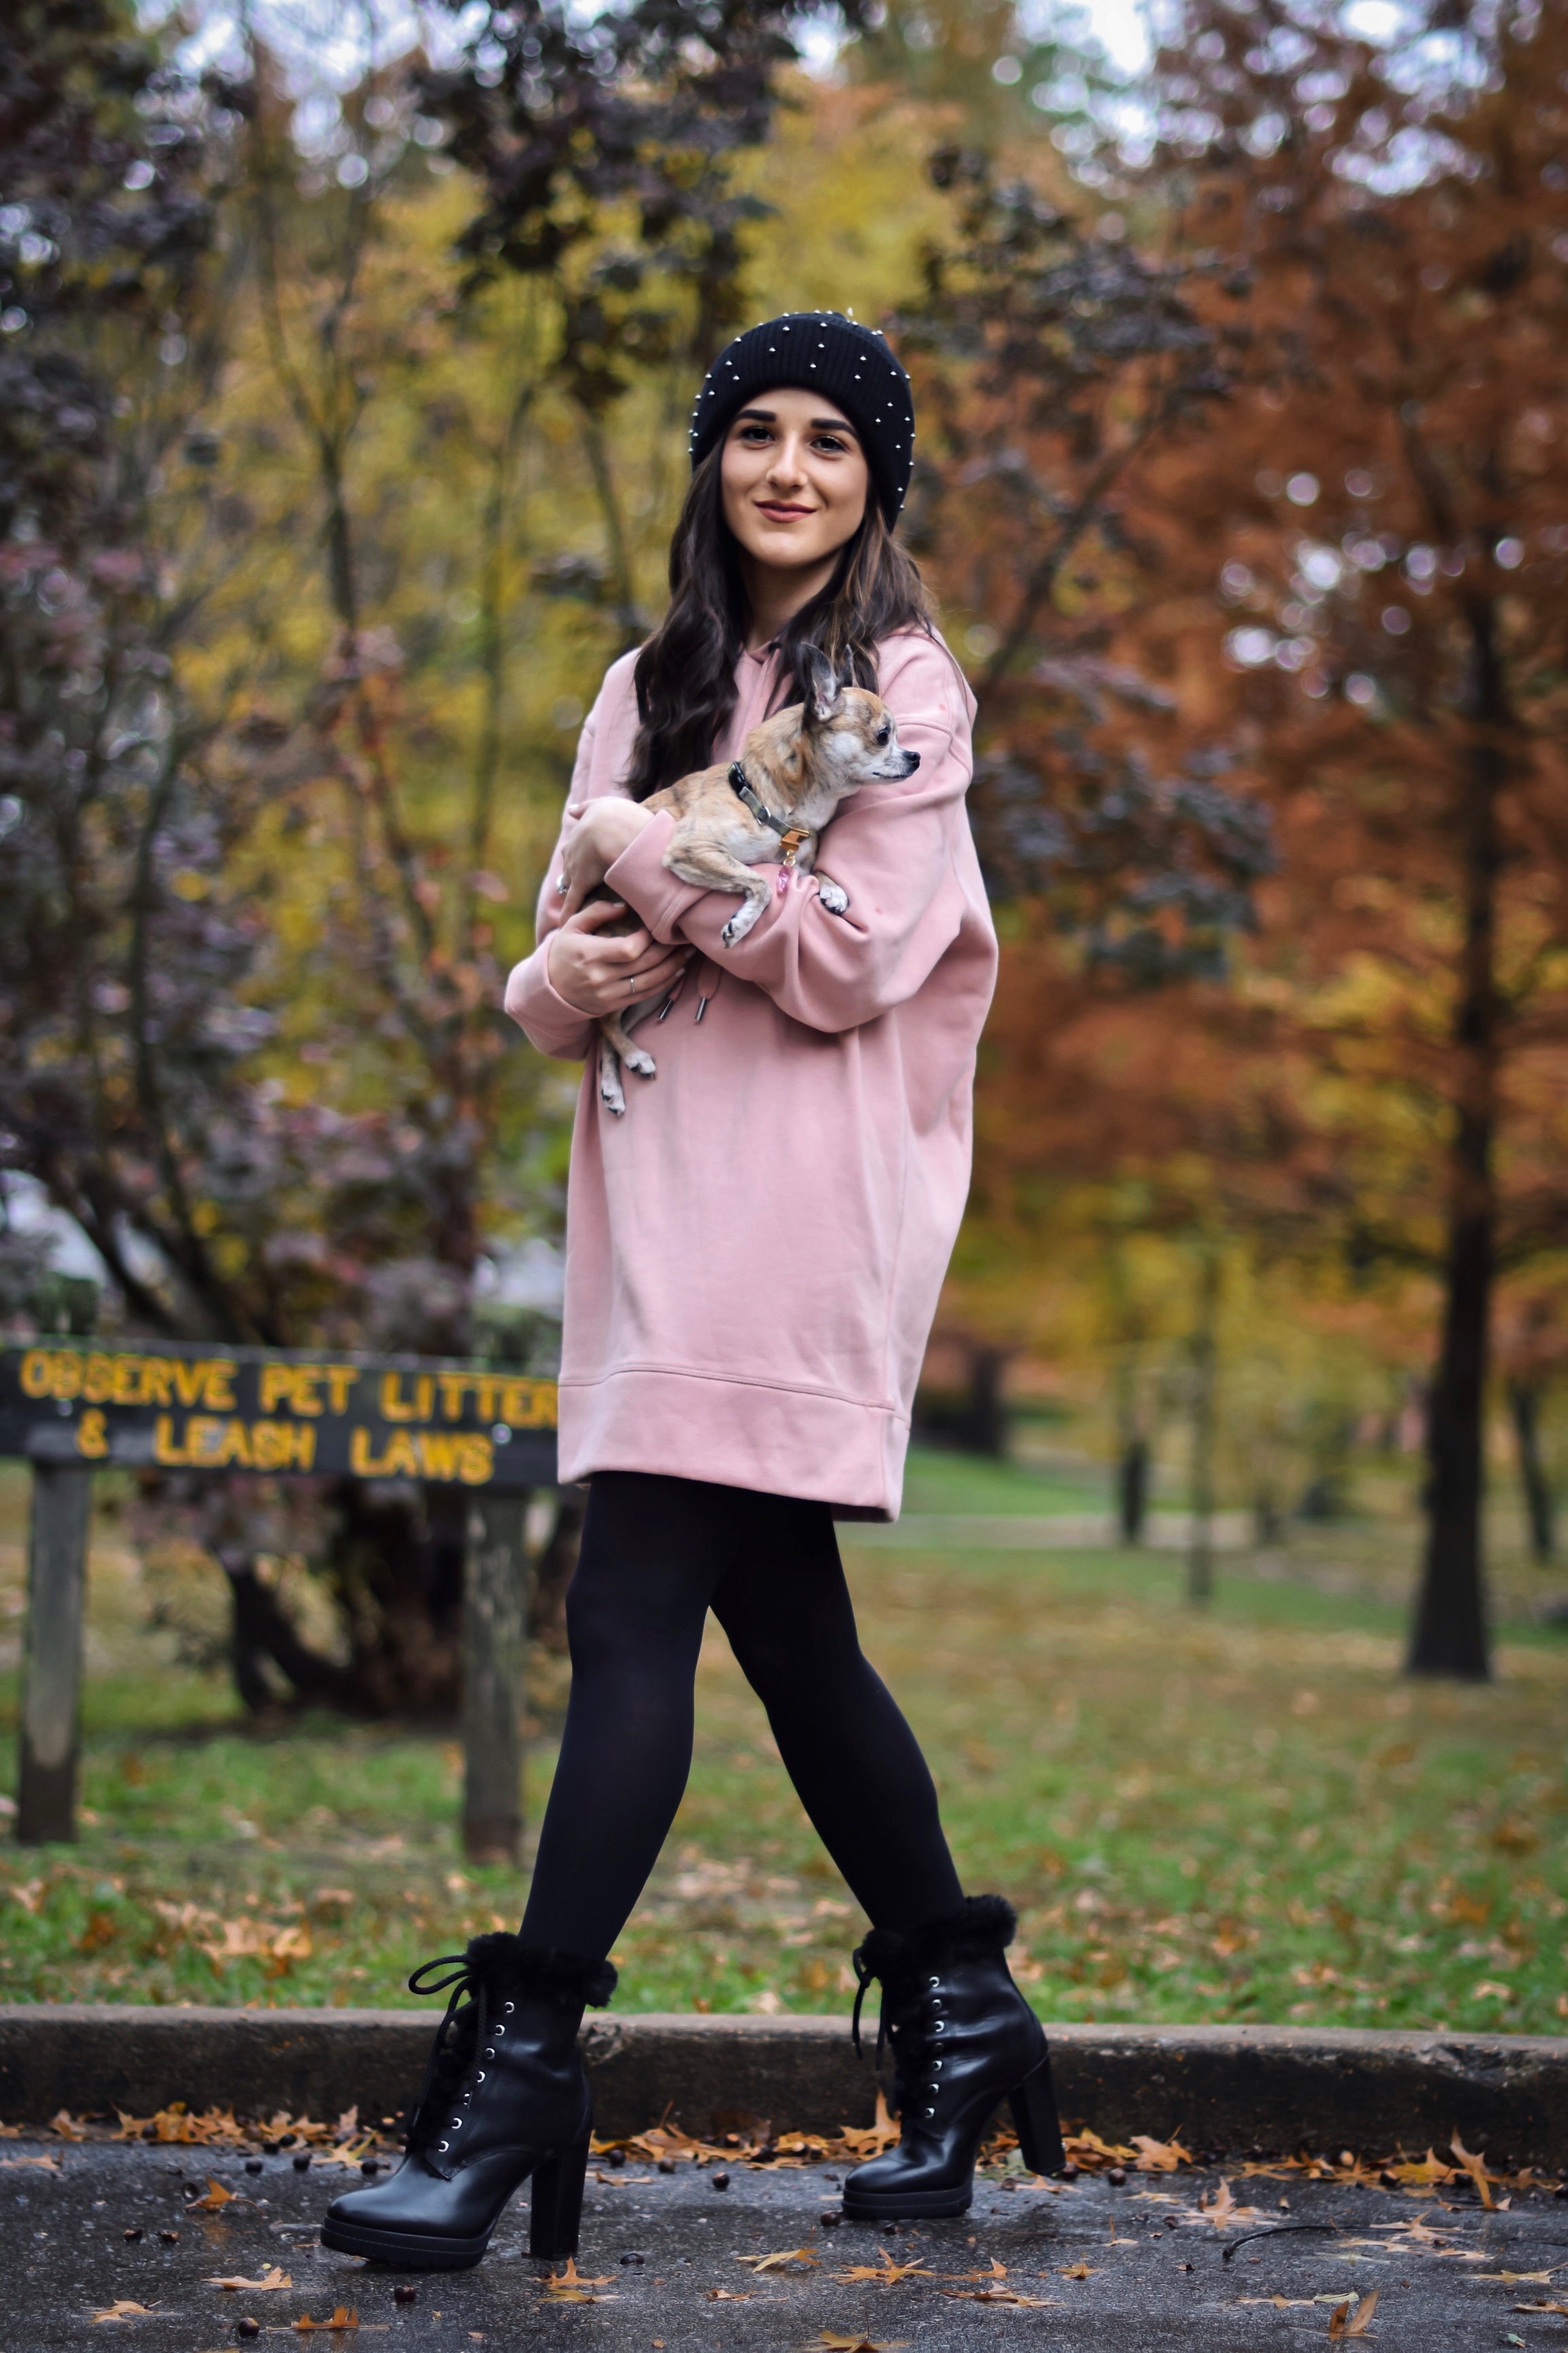 Getting Winter Ready With Macy's Esther Santer Fashion Blog NYC Street Style Blogger Outfit OOTD Trendy Chihuahua Pink Sweatshirt Dress Black Beanie Black Fur Booties Boots Shoes Fall  Winter Outfit Tights Beautiful H&M Shop Cute Puppy Dog Inspiration.jpg